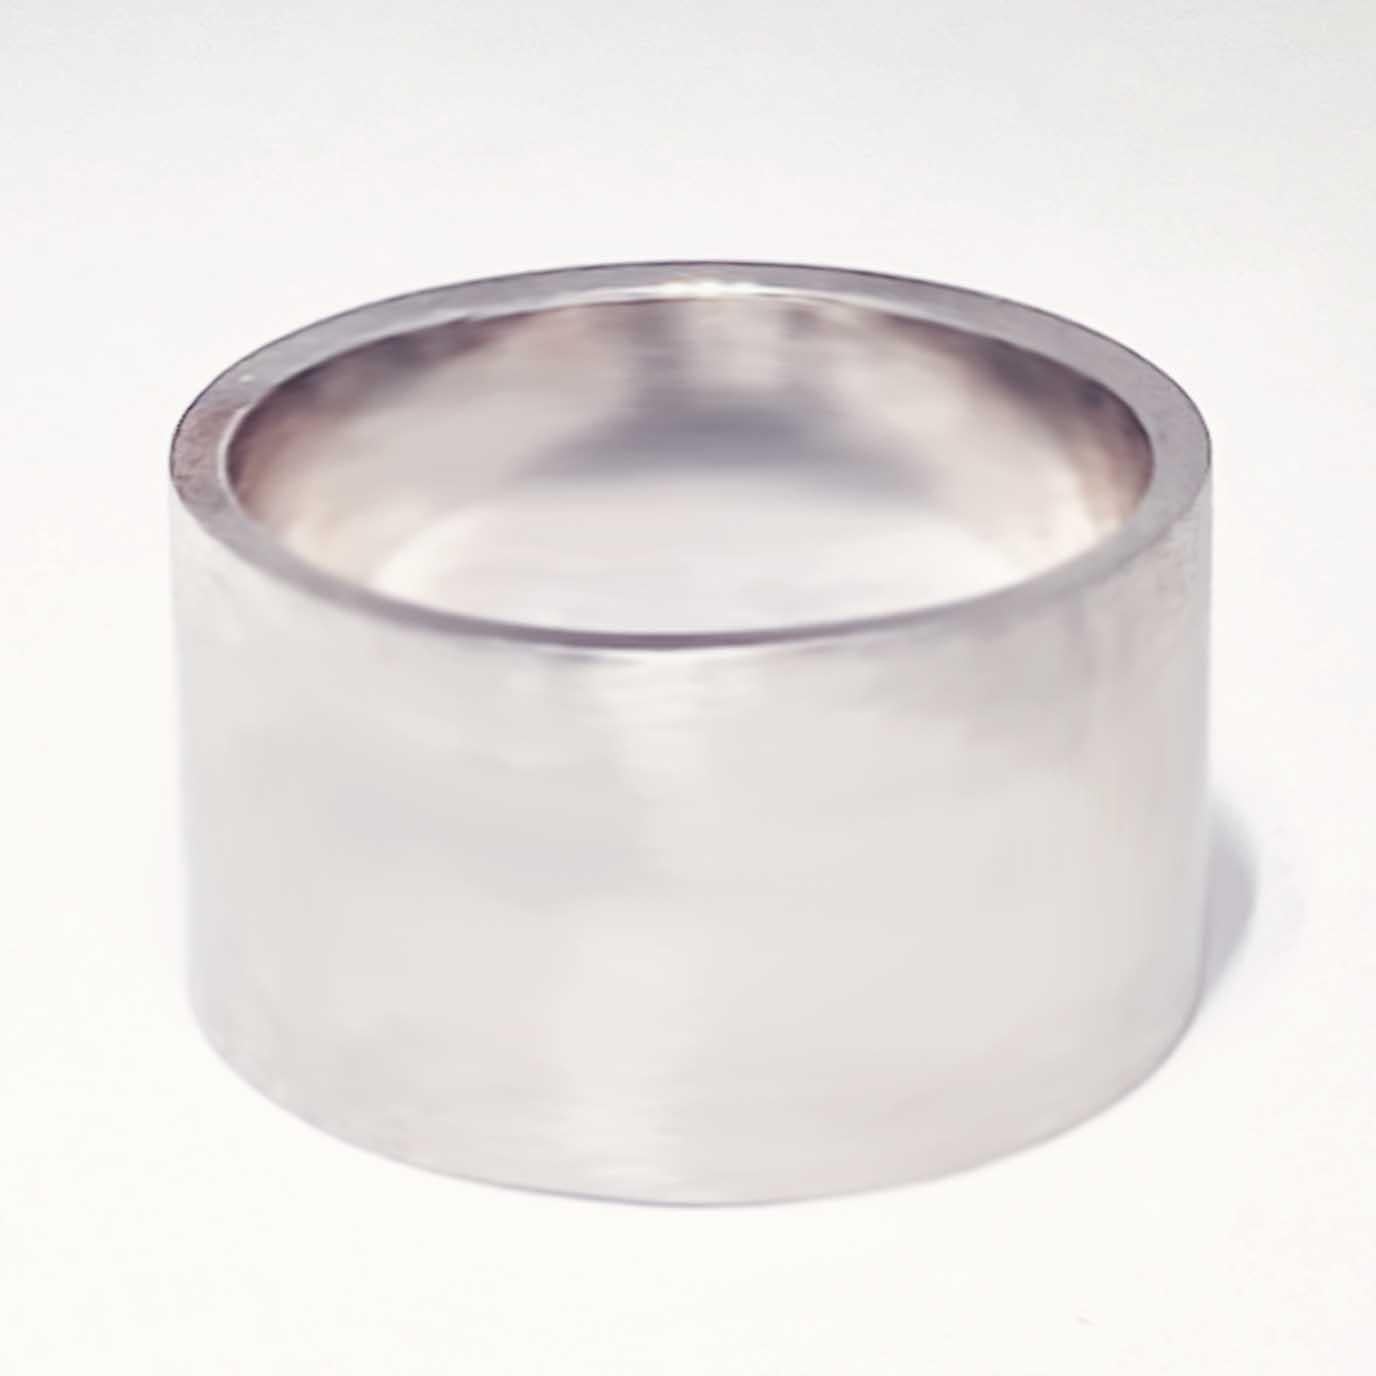 Bold, White Gold Flat, Satin, Cigar Band. This 10 millimeter wide band is a Fashion Cigar Band that can be worn as a men's wedding band or women's fashion band!  It is a perfect ring for those who love a classical style with a modern design! The